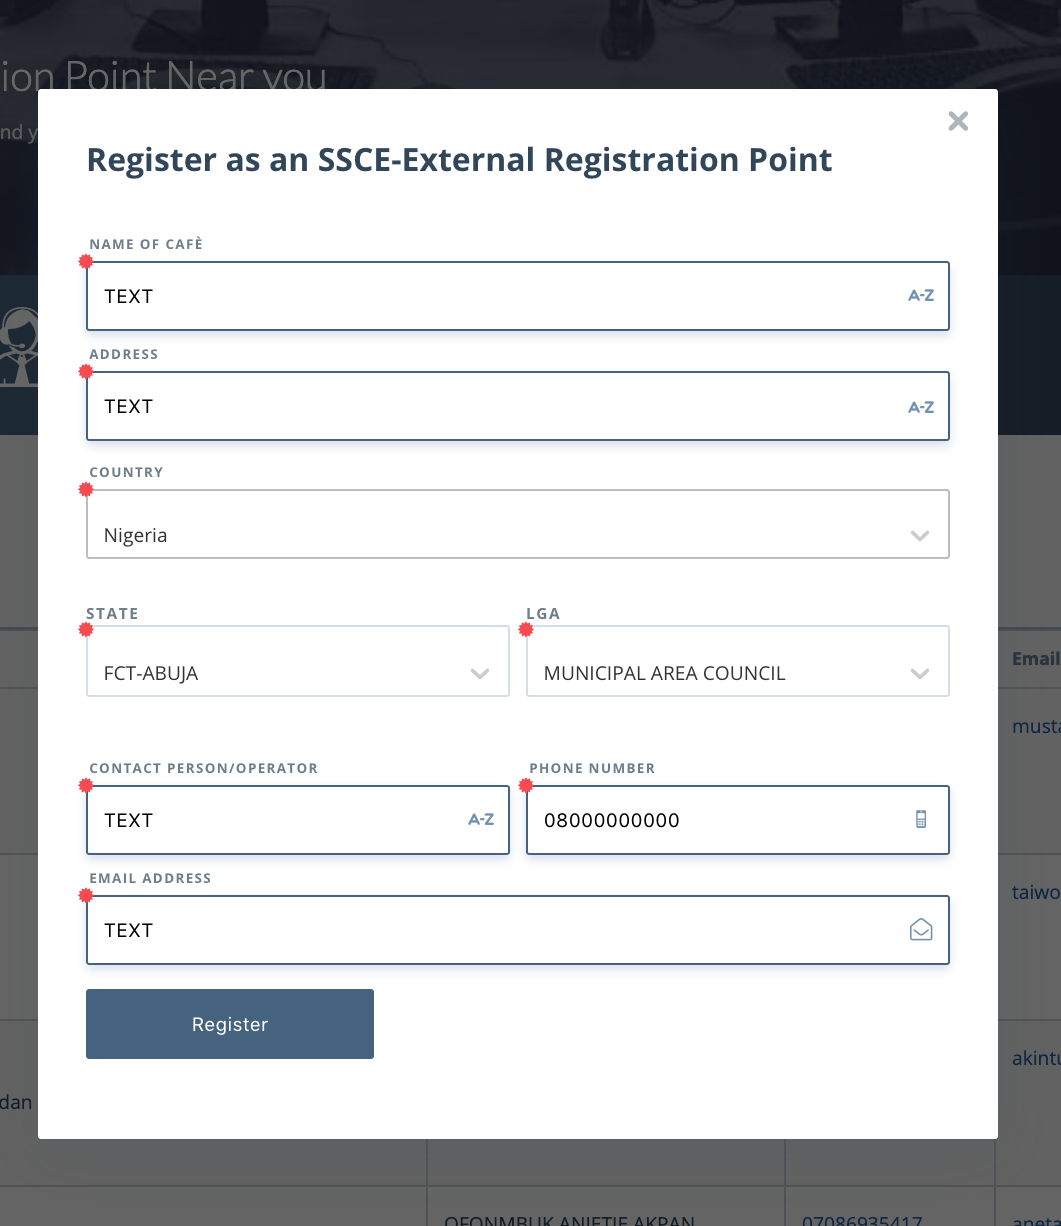 2023 NECO GCE Registration Form [SSCE External] is Out